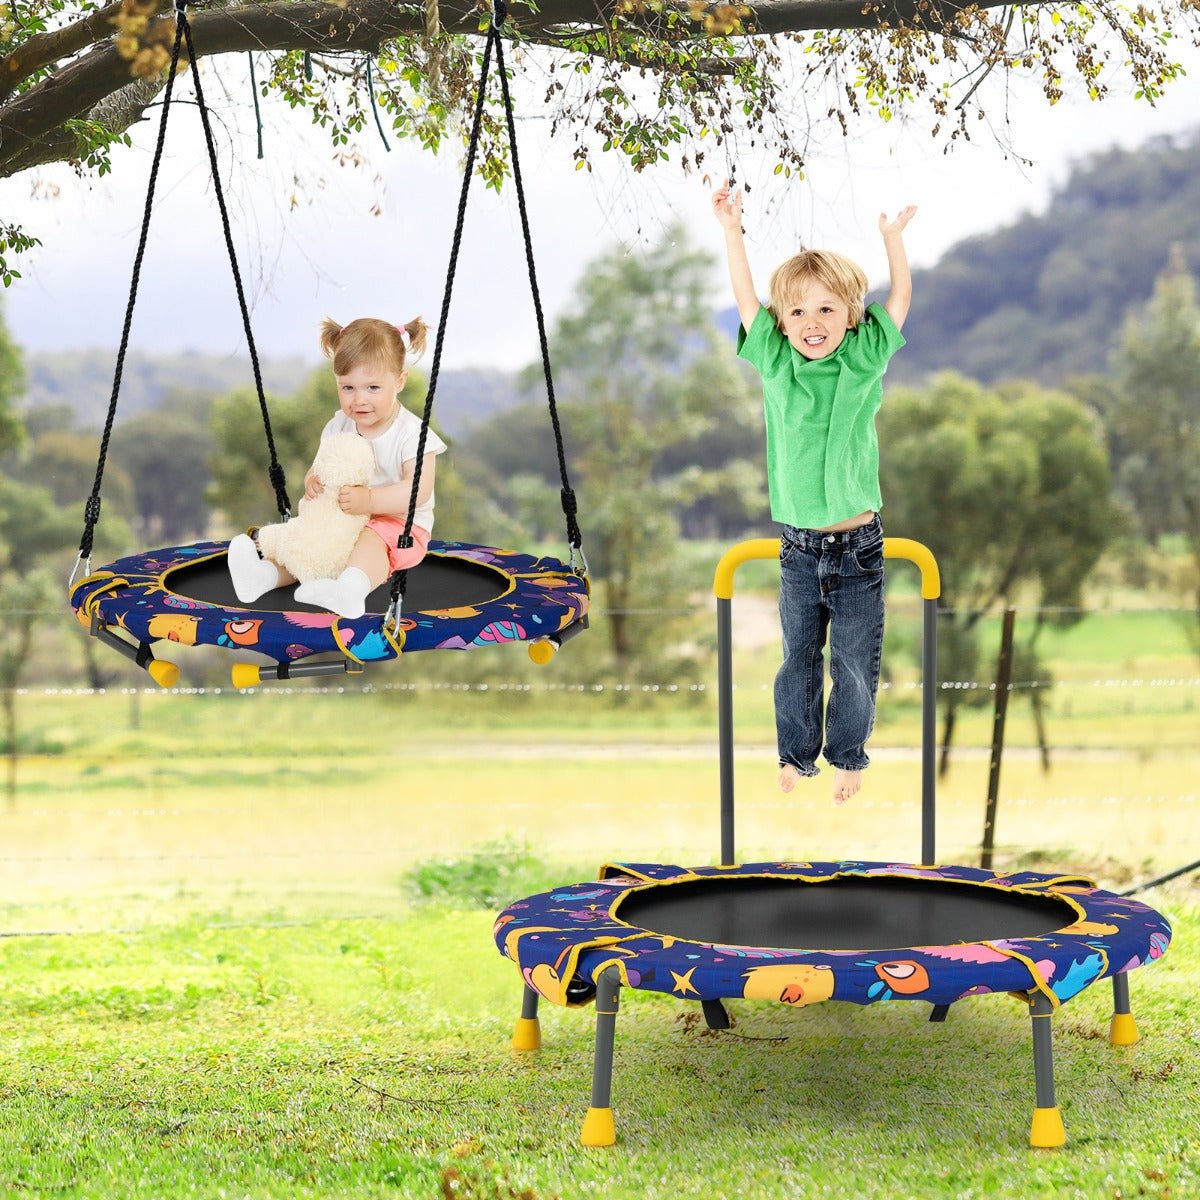 Play and Bounce Fusion: Convertible Swing and Trampoline Set with Upholstered Handrail for Kids